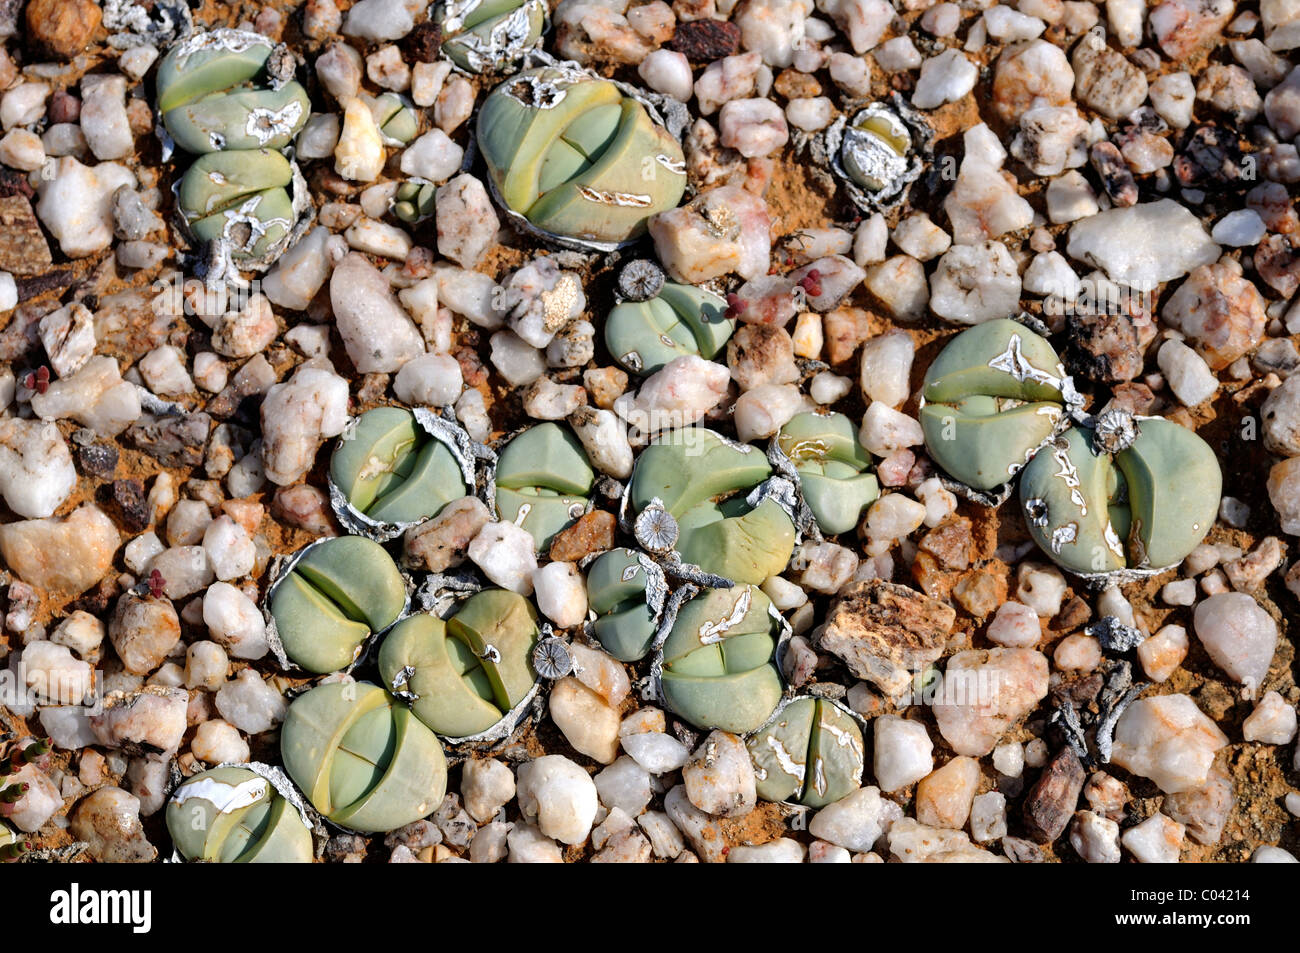 Argyroderma sp., distribution restricted to the quartz fields of the Knersvlakte region, Namaqualand, South Africa Stock Photo